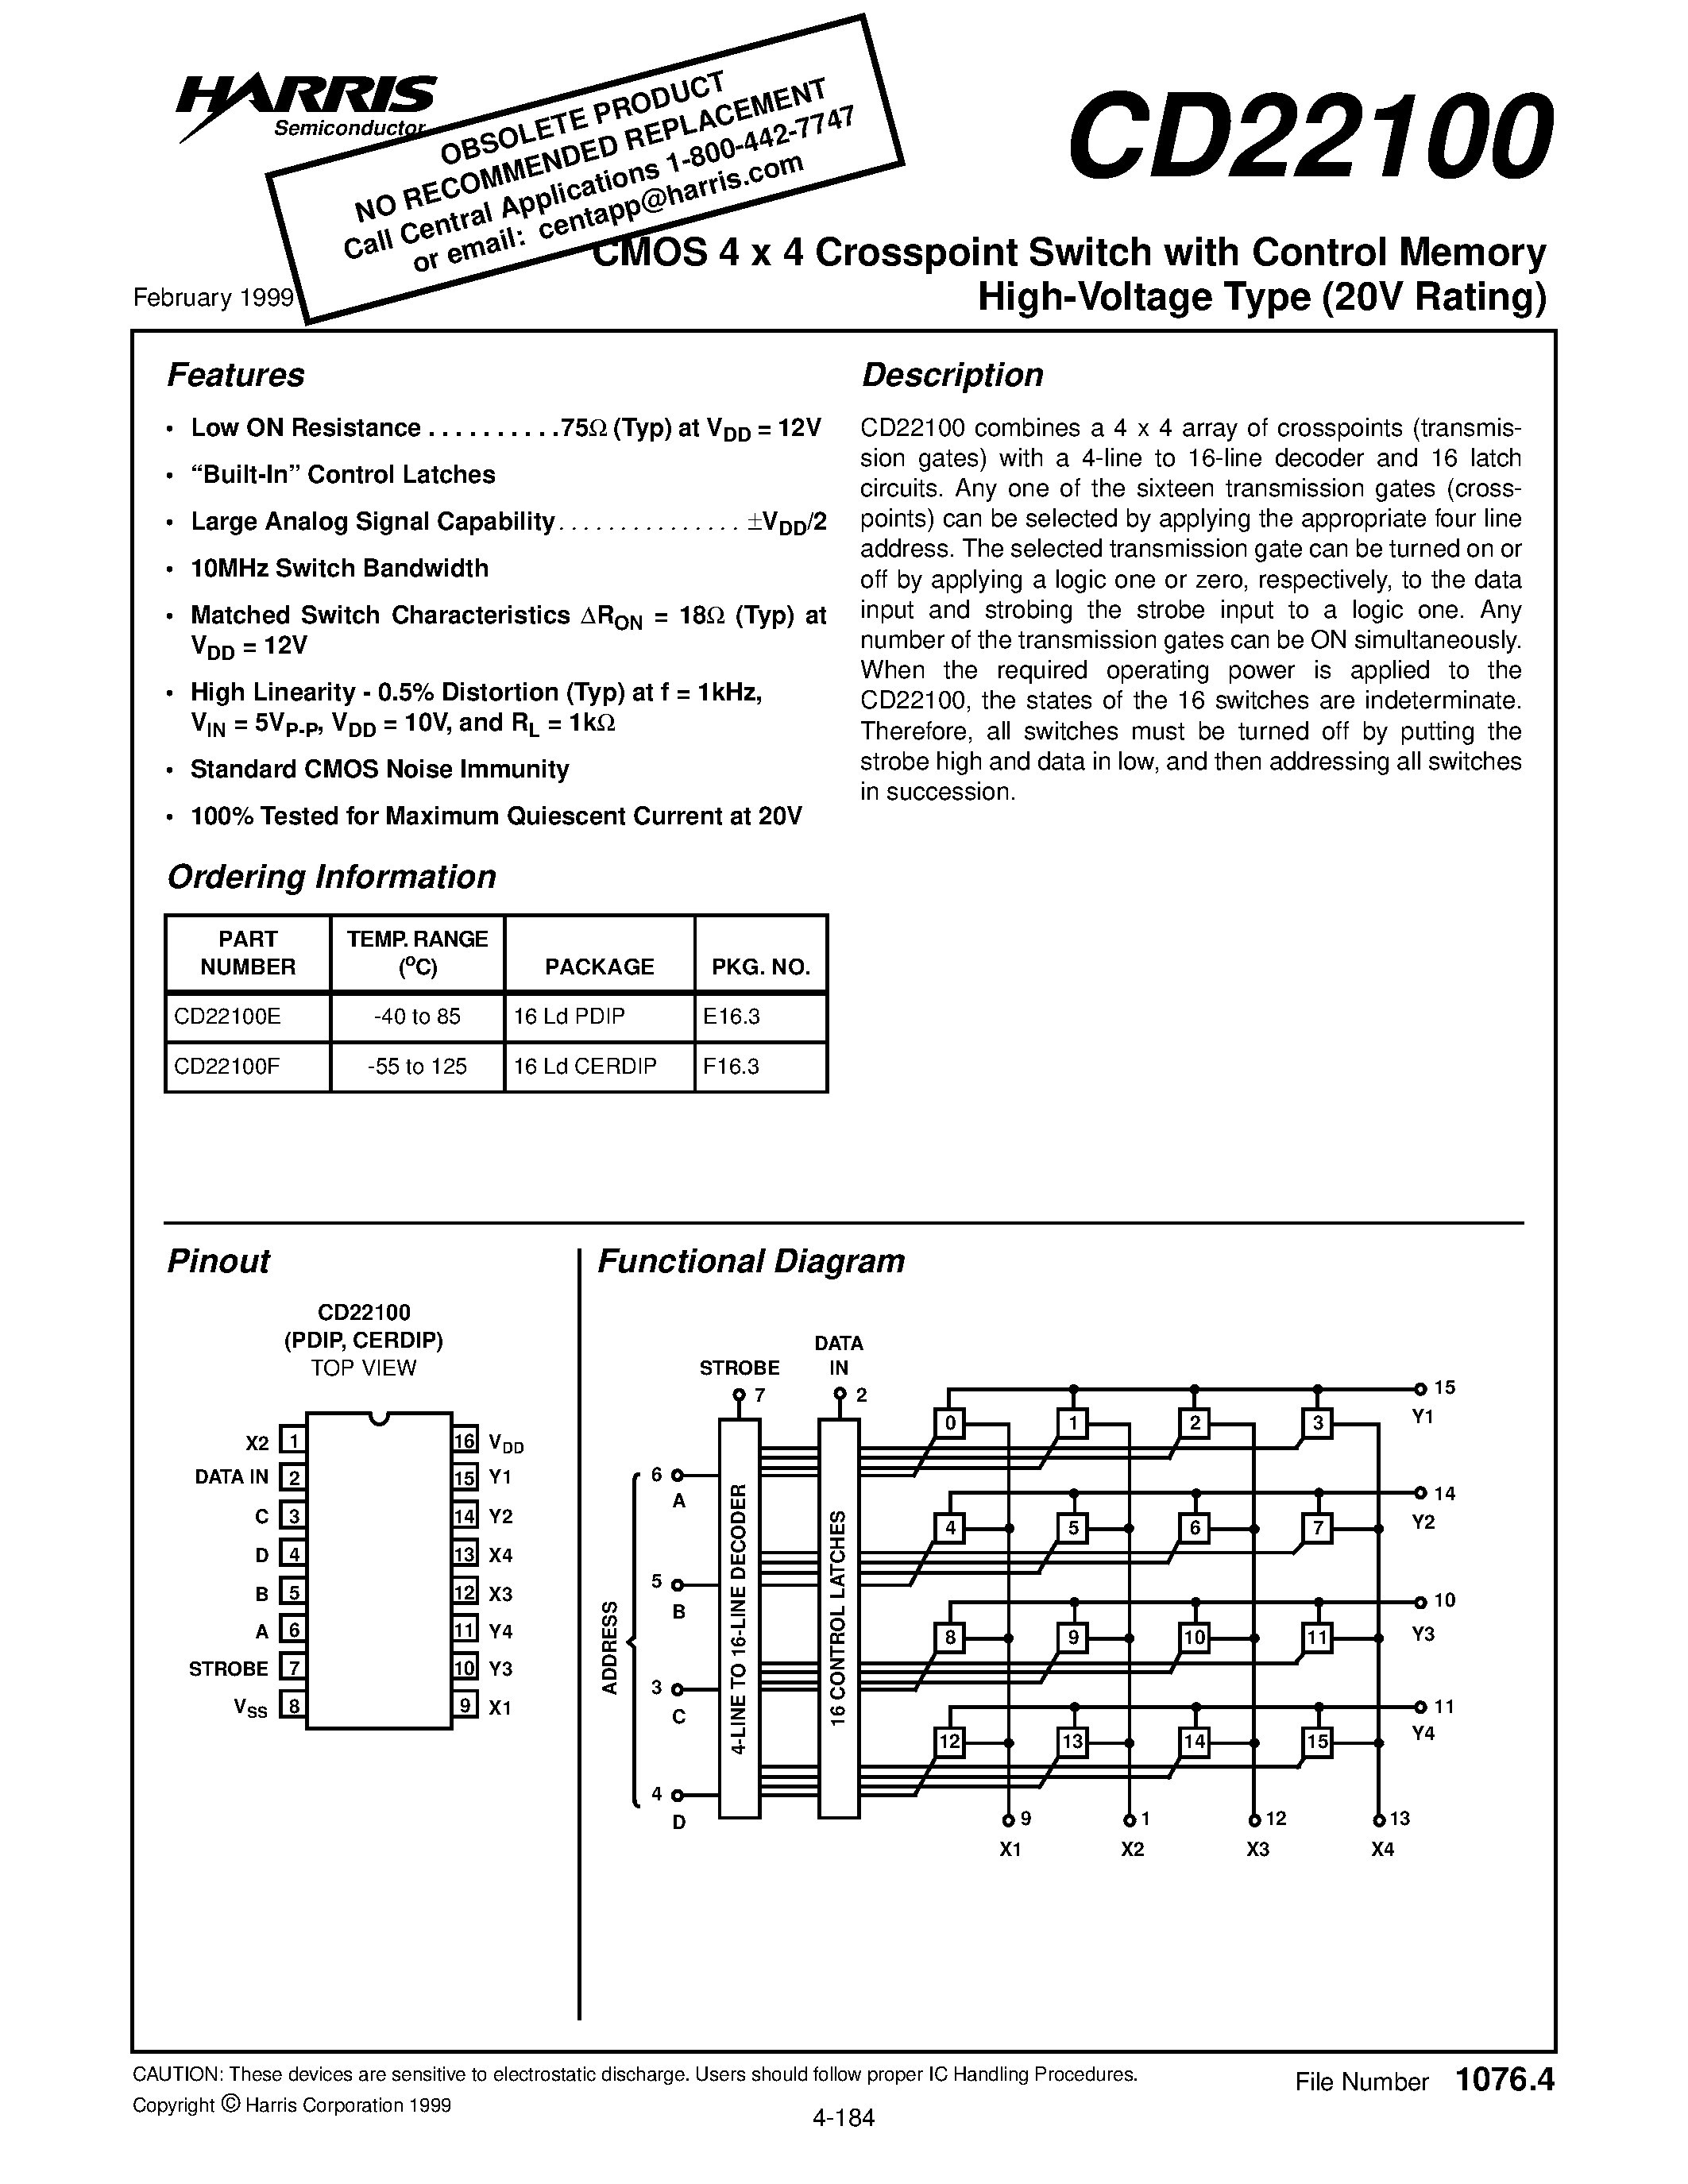 Datasheet CD22100E - CMOS 4 x 4 Crosspoint Switch with Control Memory High-Voltage Type (20V Rating) page 1